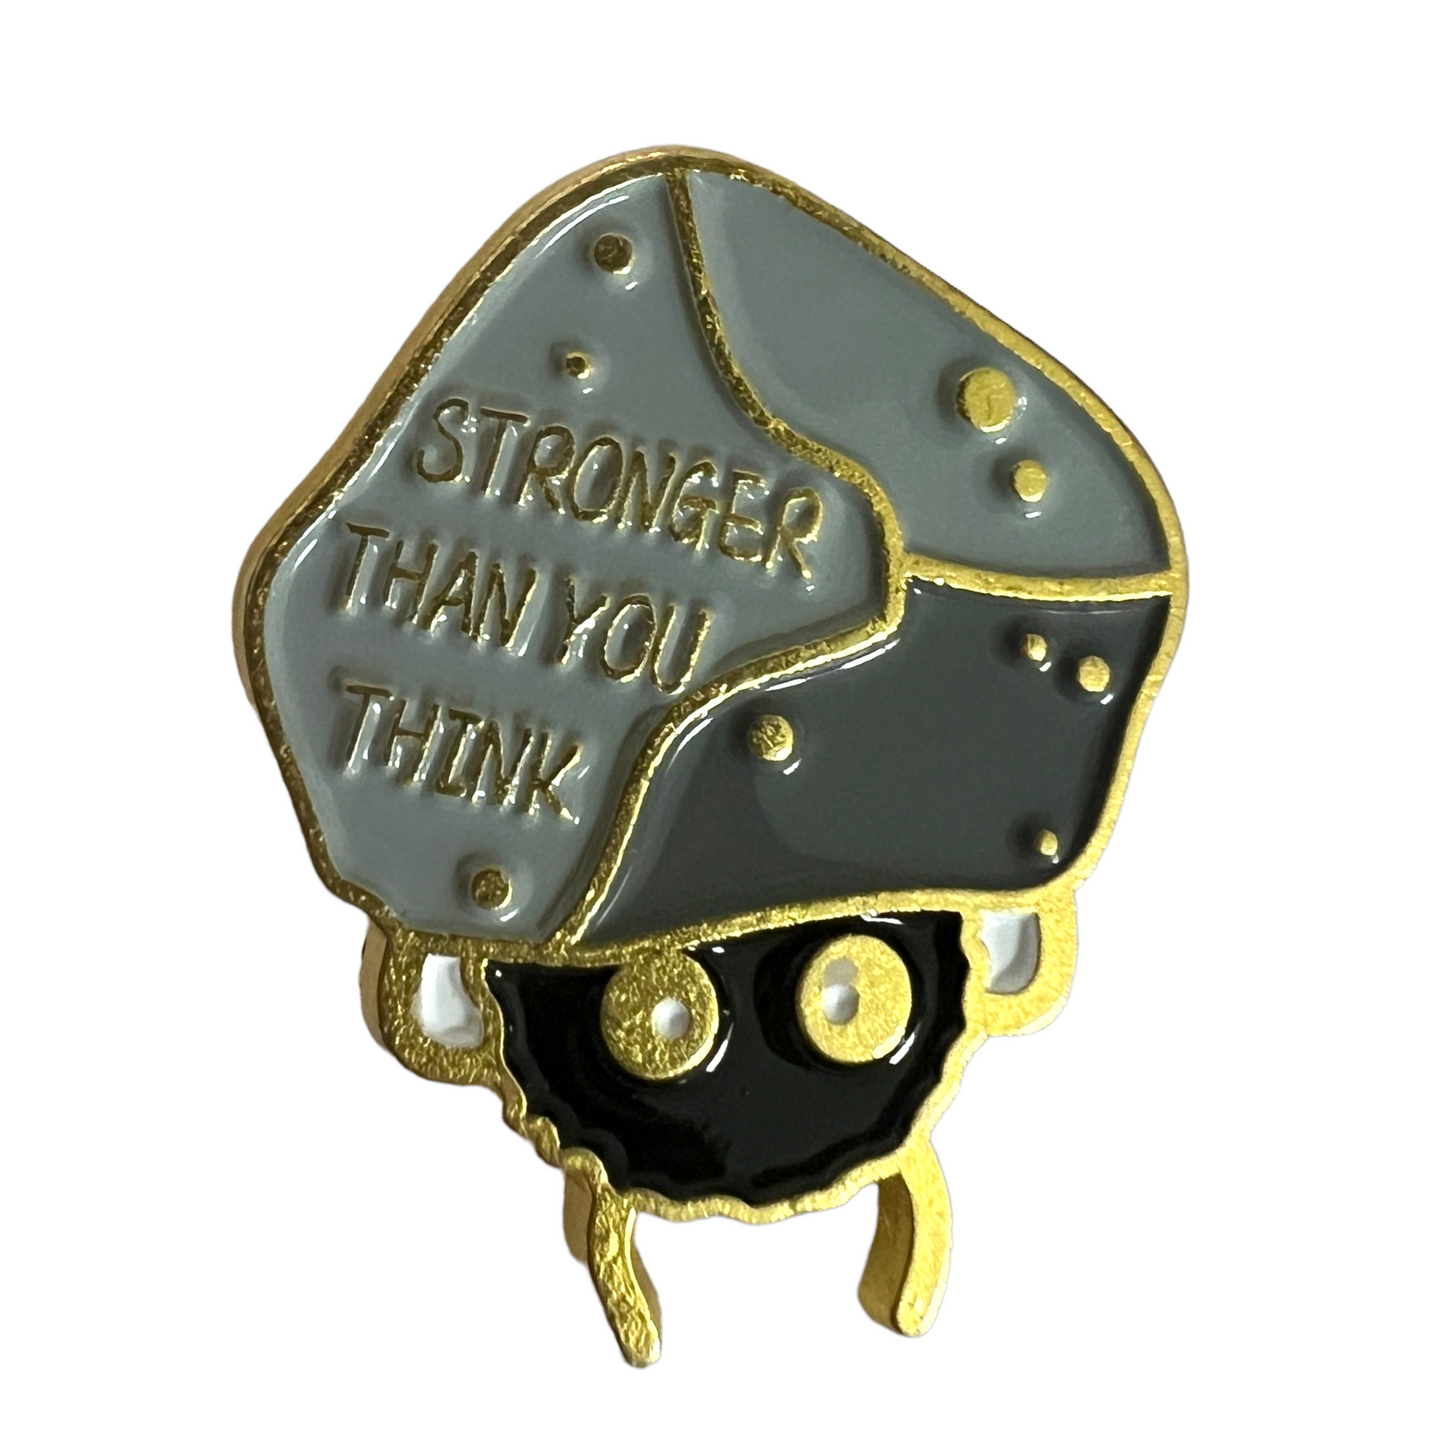 Pin — 'Stronger Than You Think'  SPIRIT SPARKPLUGS   